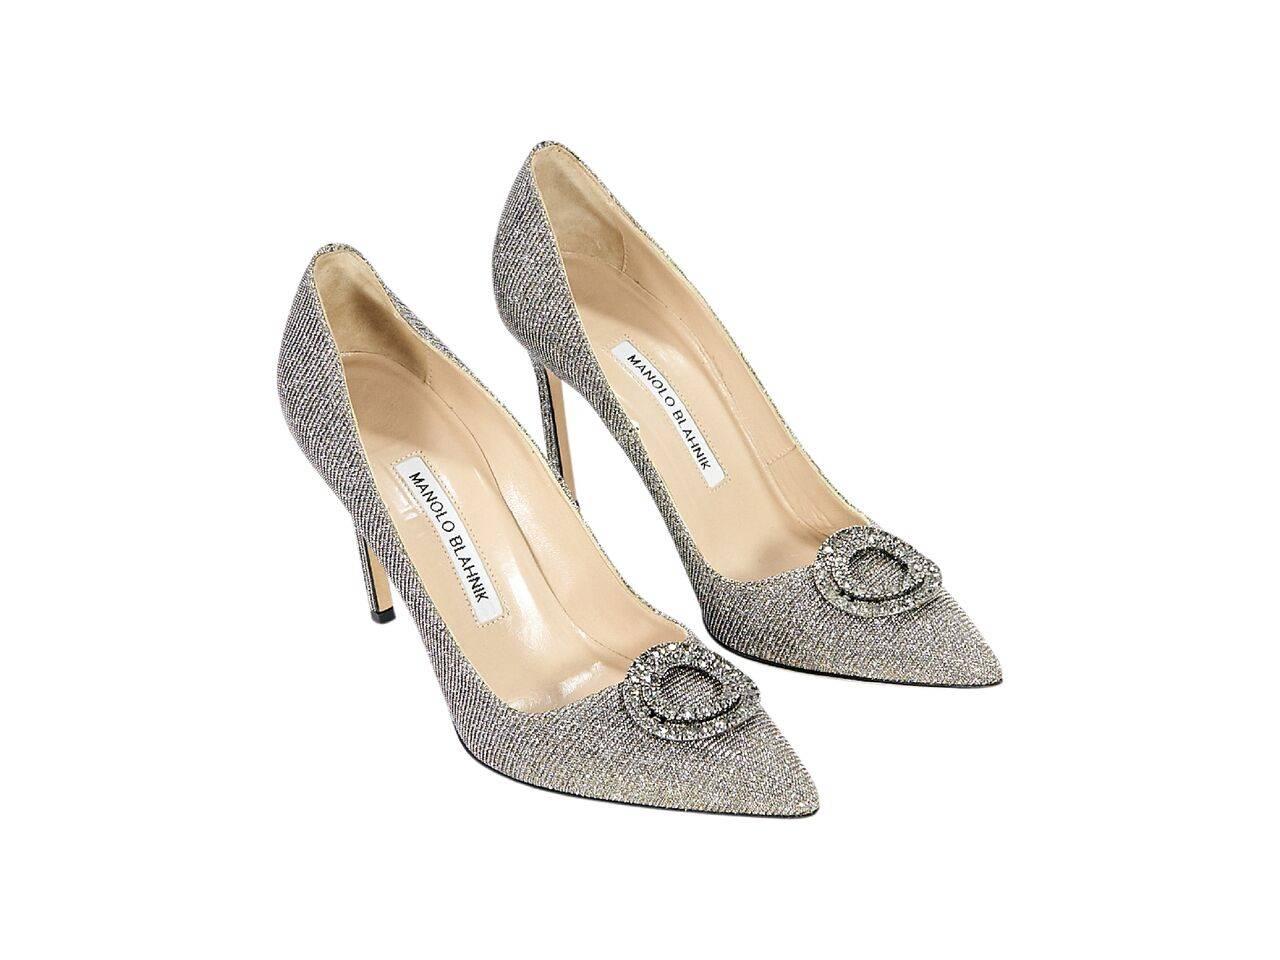 Product details:  Metallic silver embellished pumps by Manolo Blahnik.  Point toe.  Slip-on style.  
Condition: Pre-owned. Very good.
Est. Retail $ 698.00